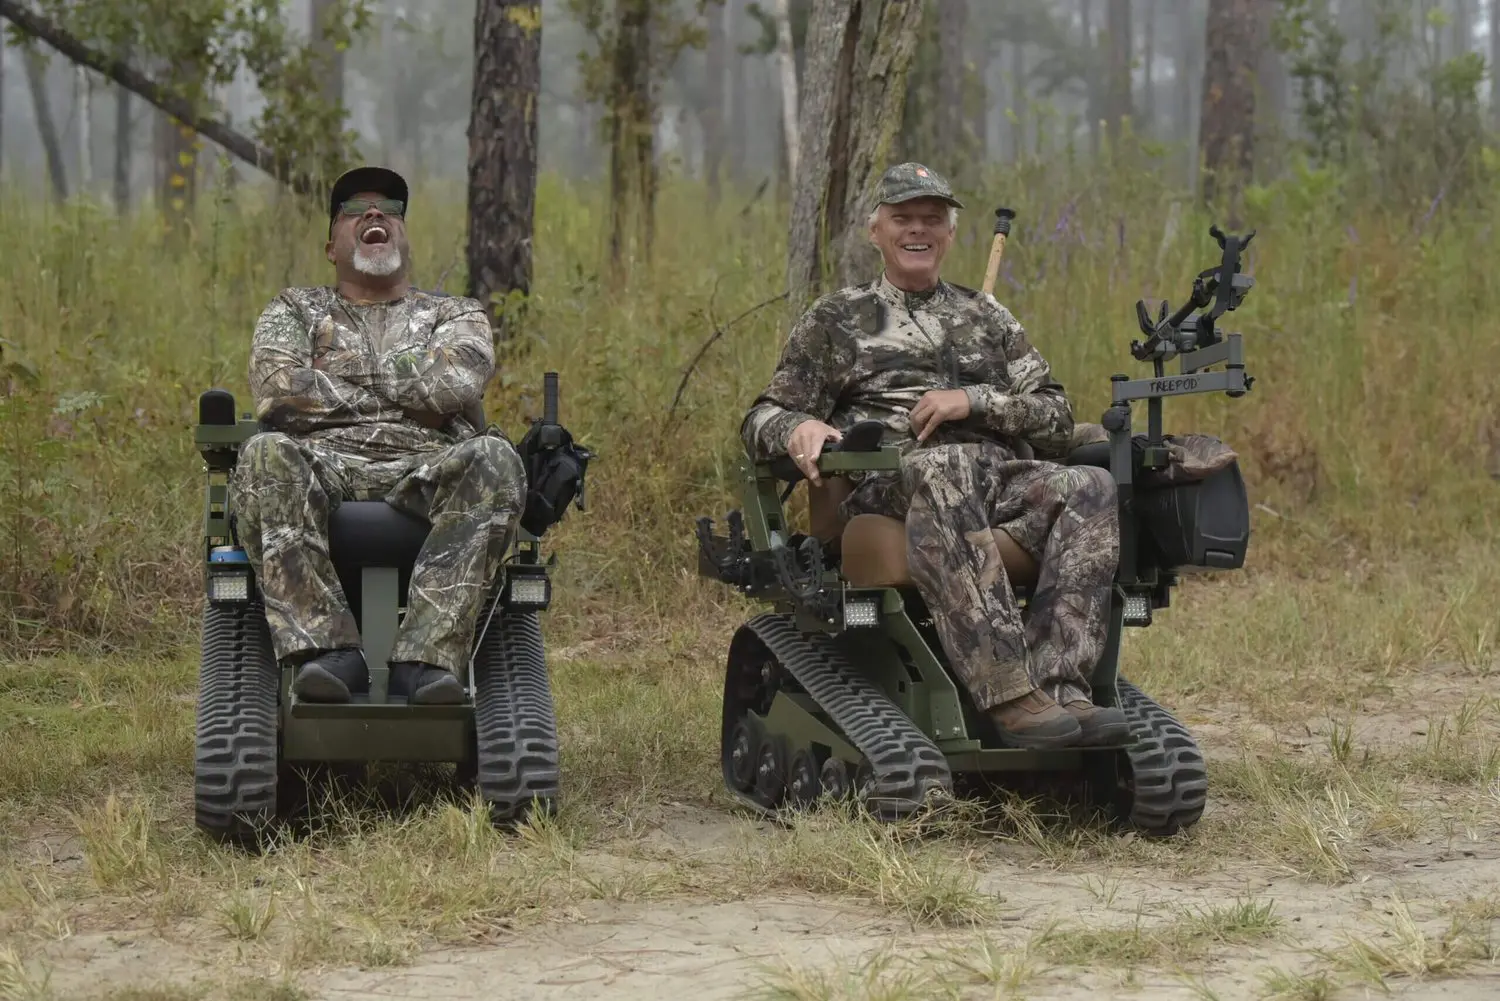 Two men in camouflage gear sitting on a motorized vehicle.